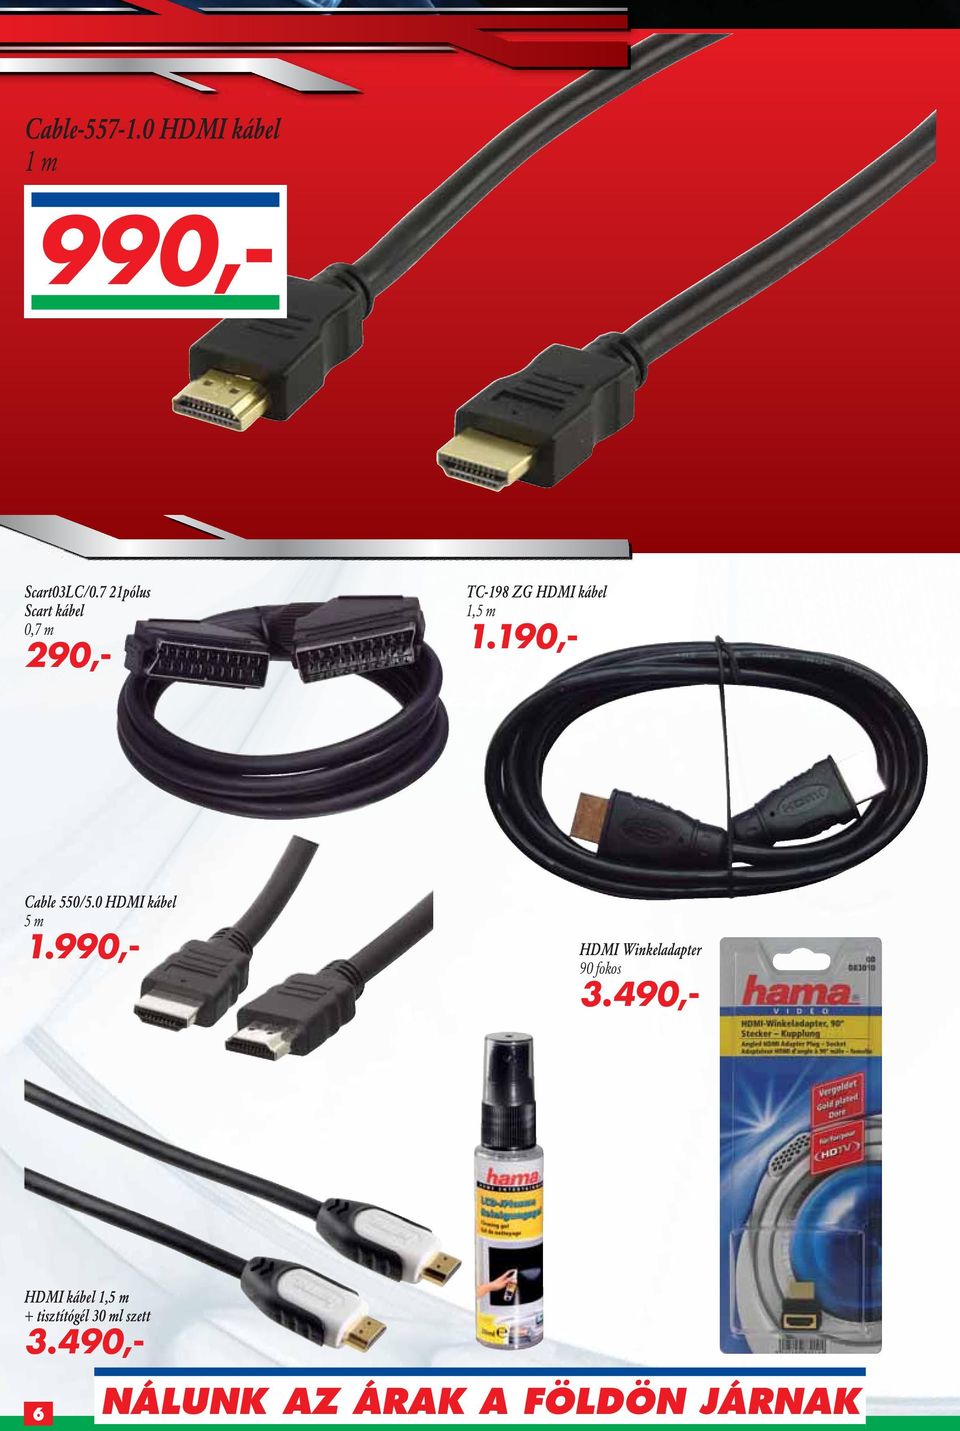 190,- Cable 550/5.0 HDMI kábel 5 m 1.